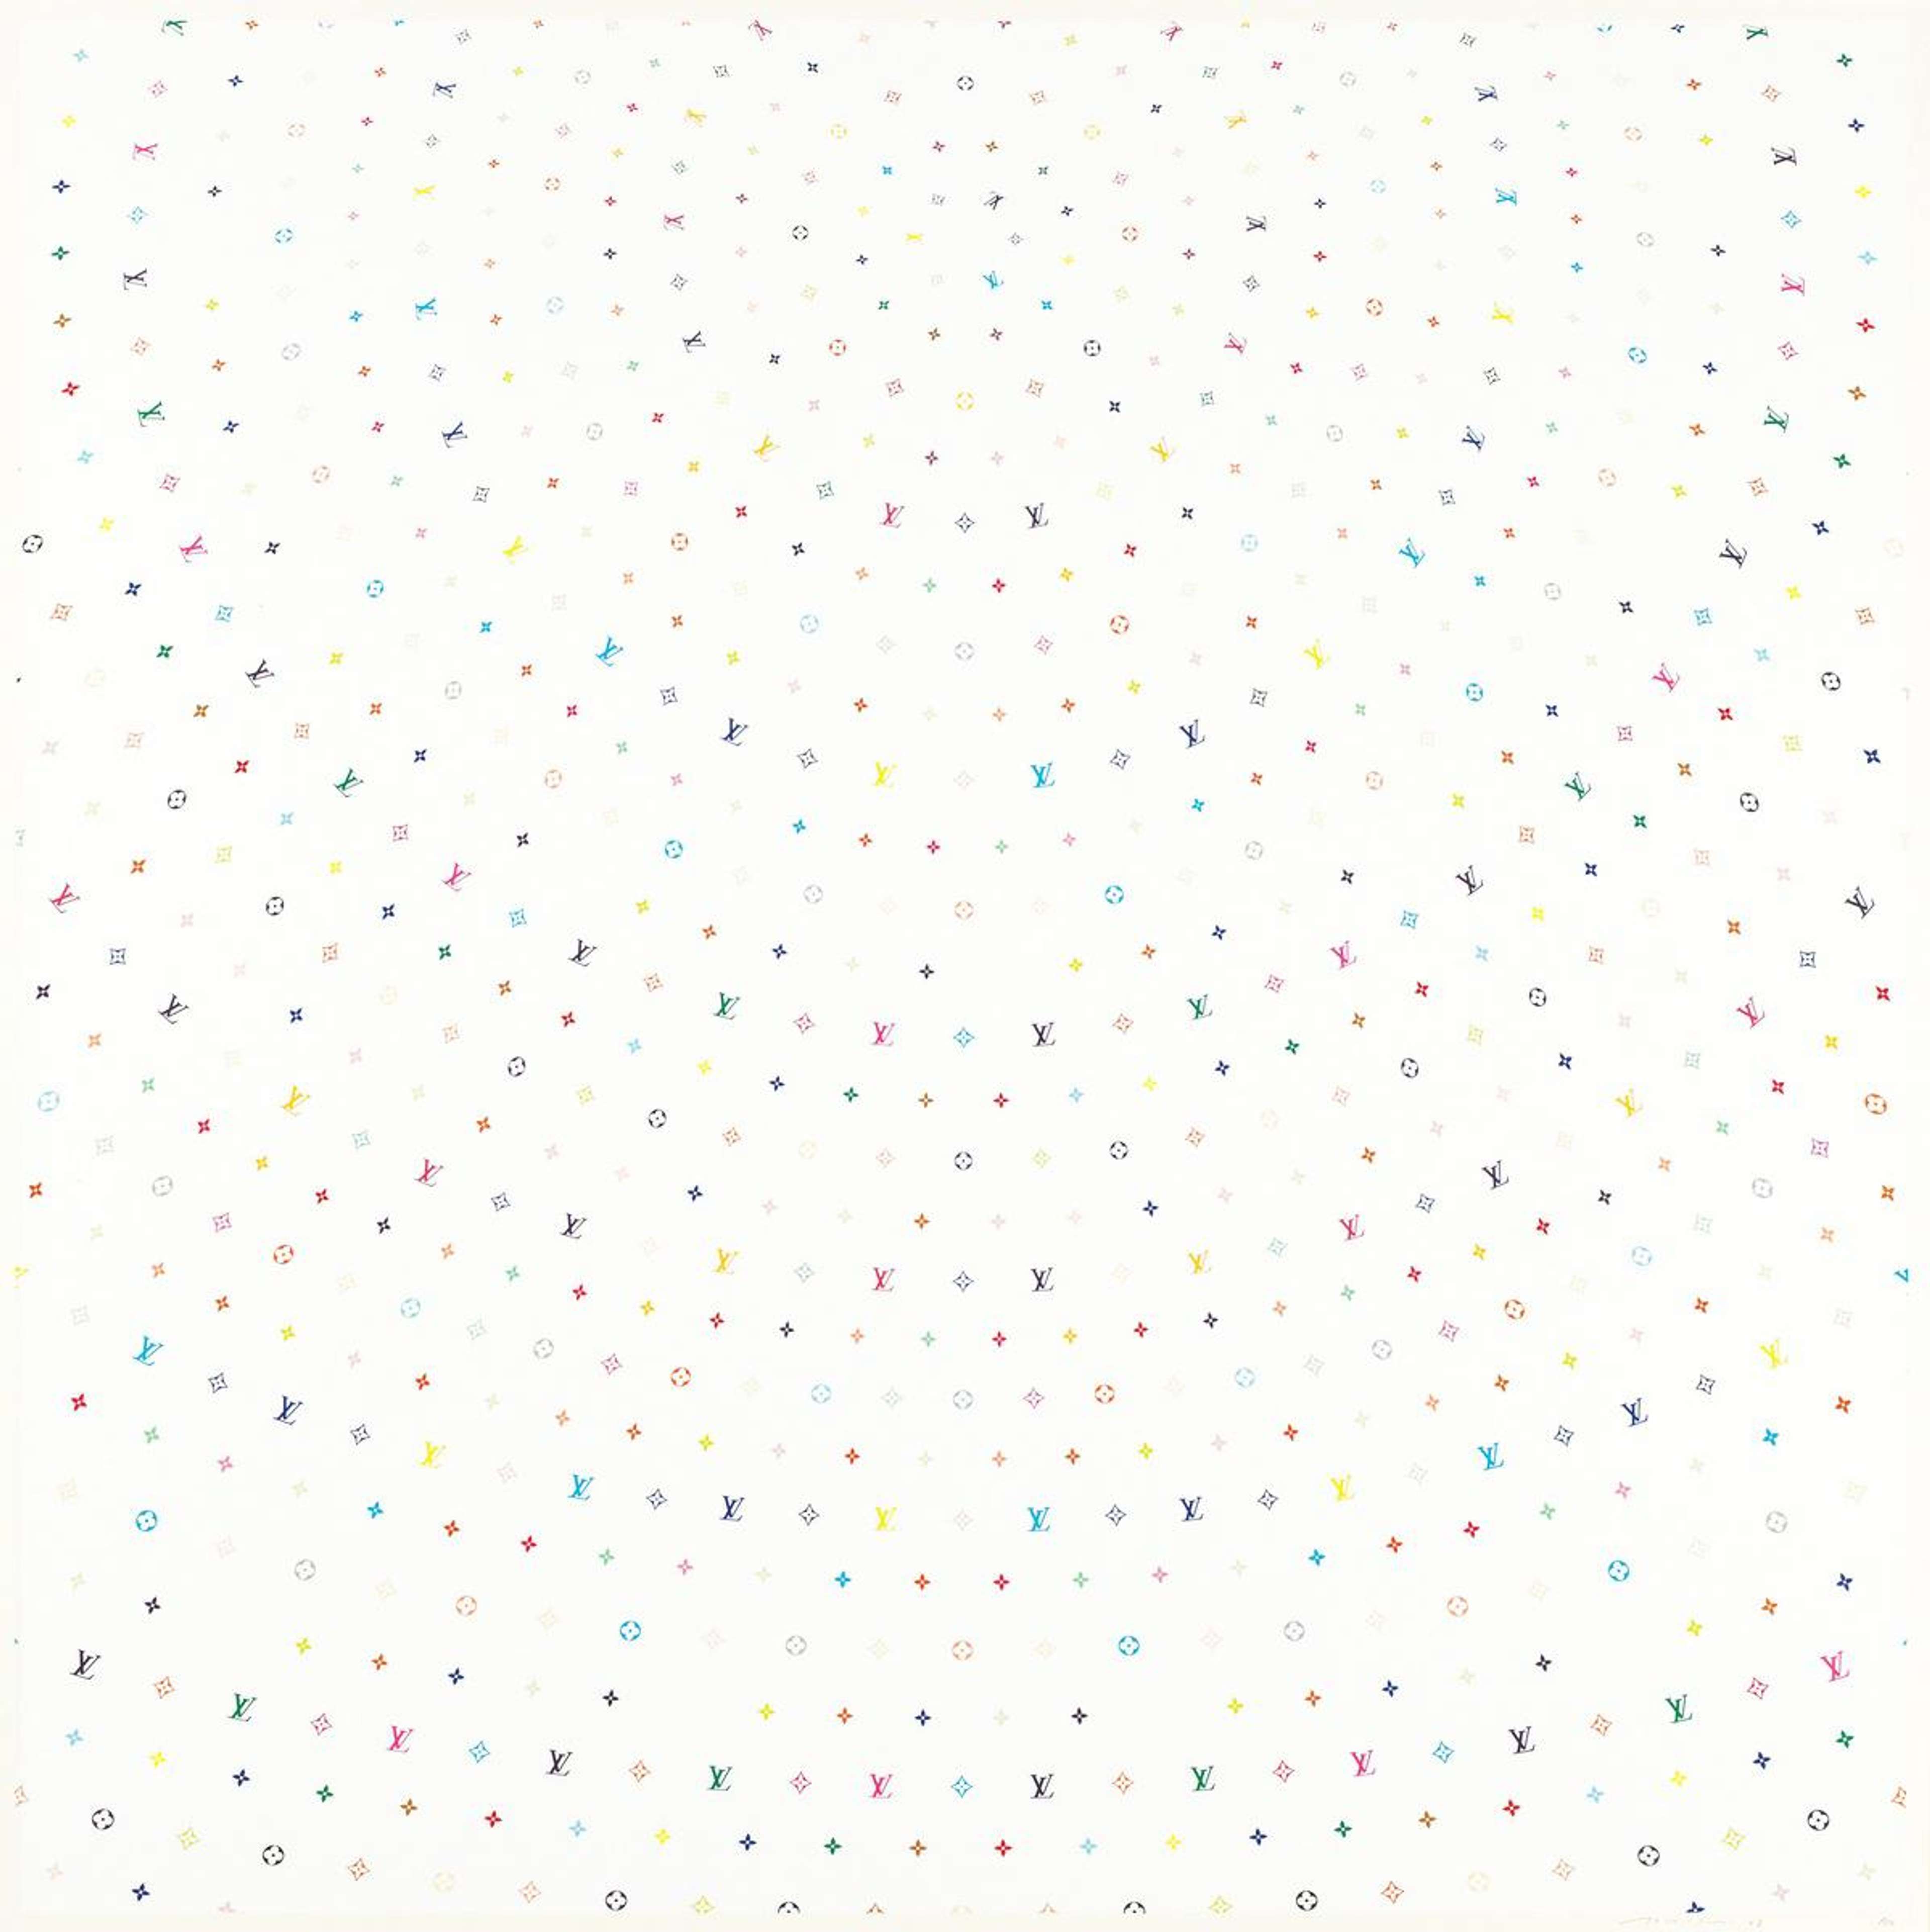 Takashi Murakami’s Sphere (white). Multicoloured monogram Louis Vuitton pattern in the shape of a sphere against a white background.